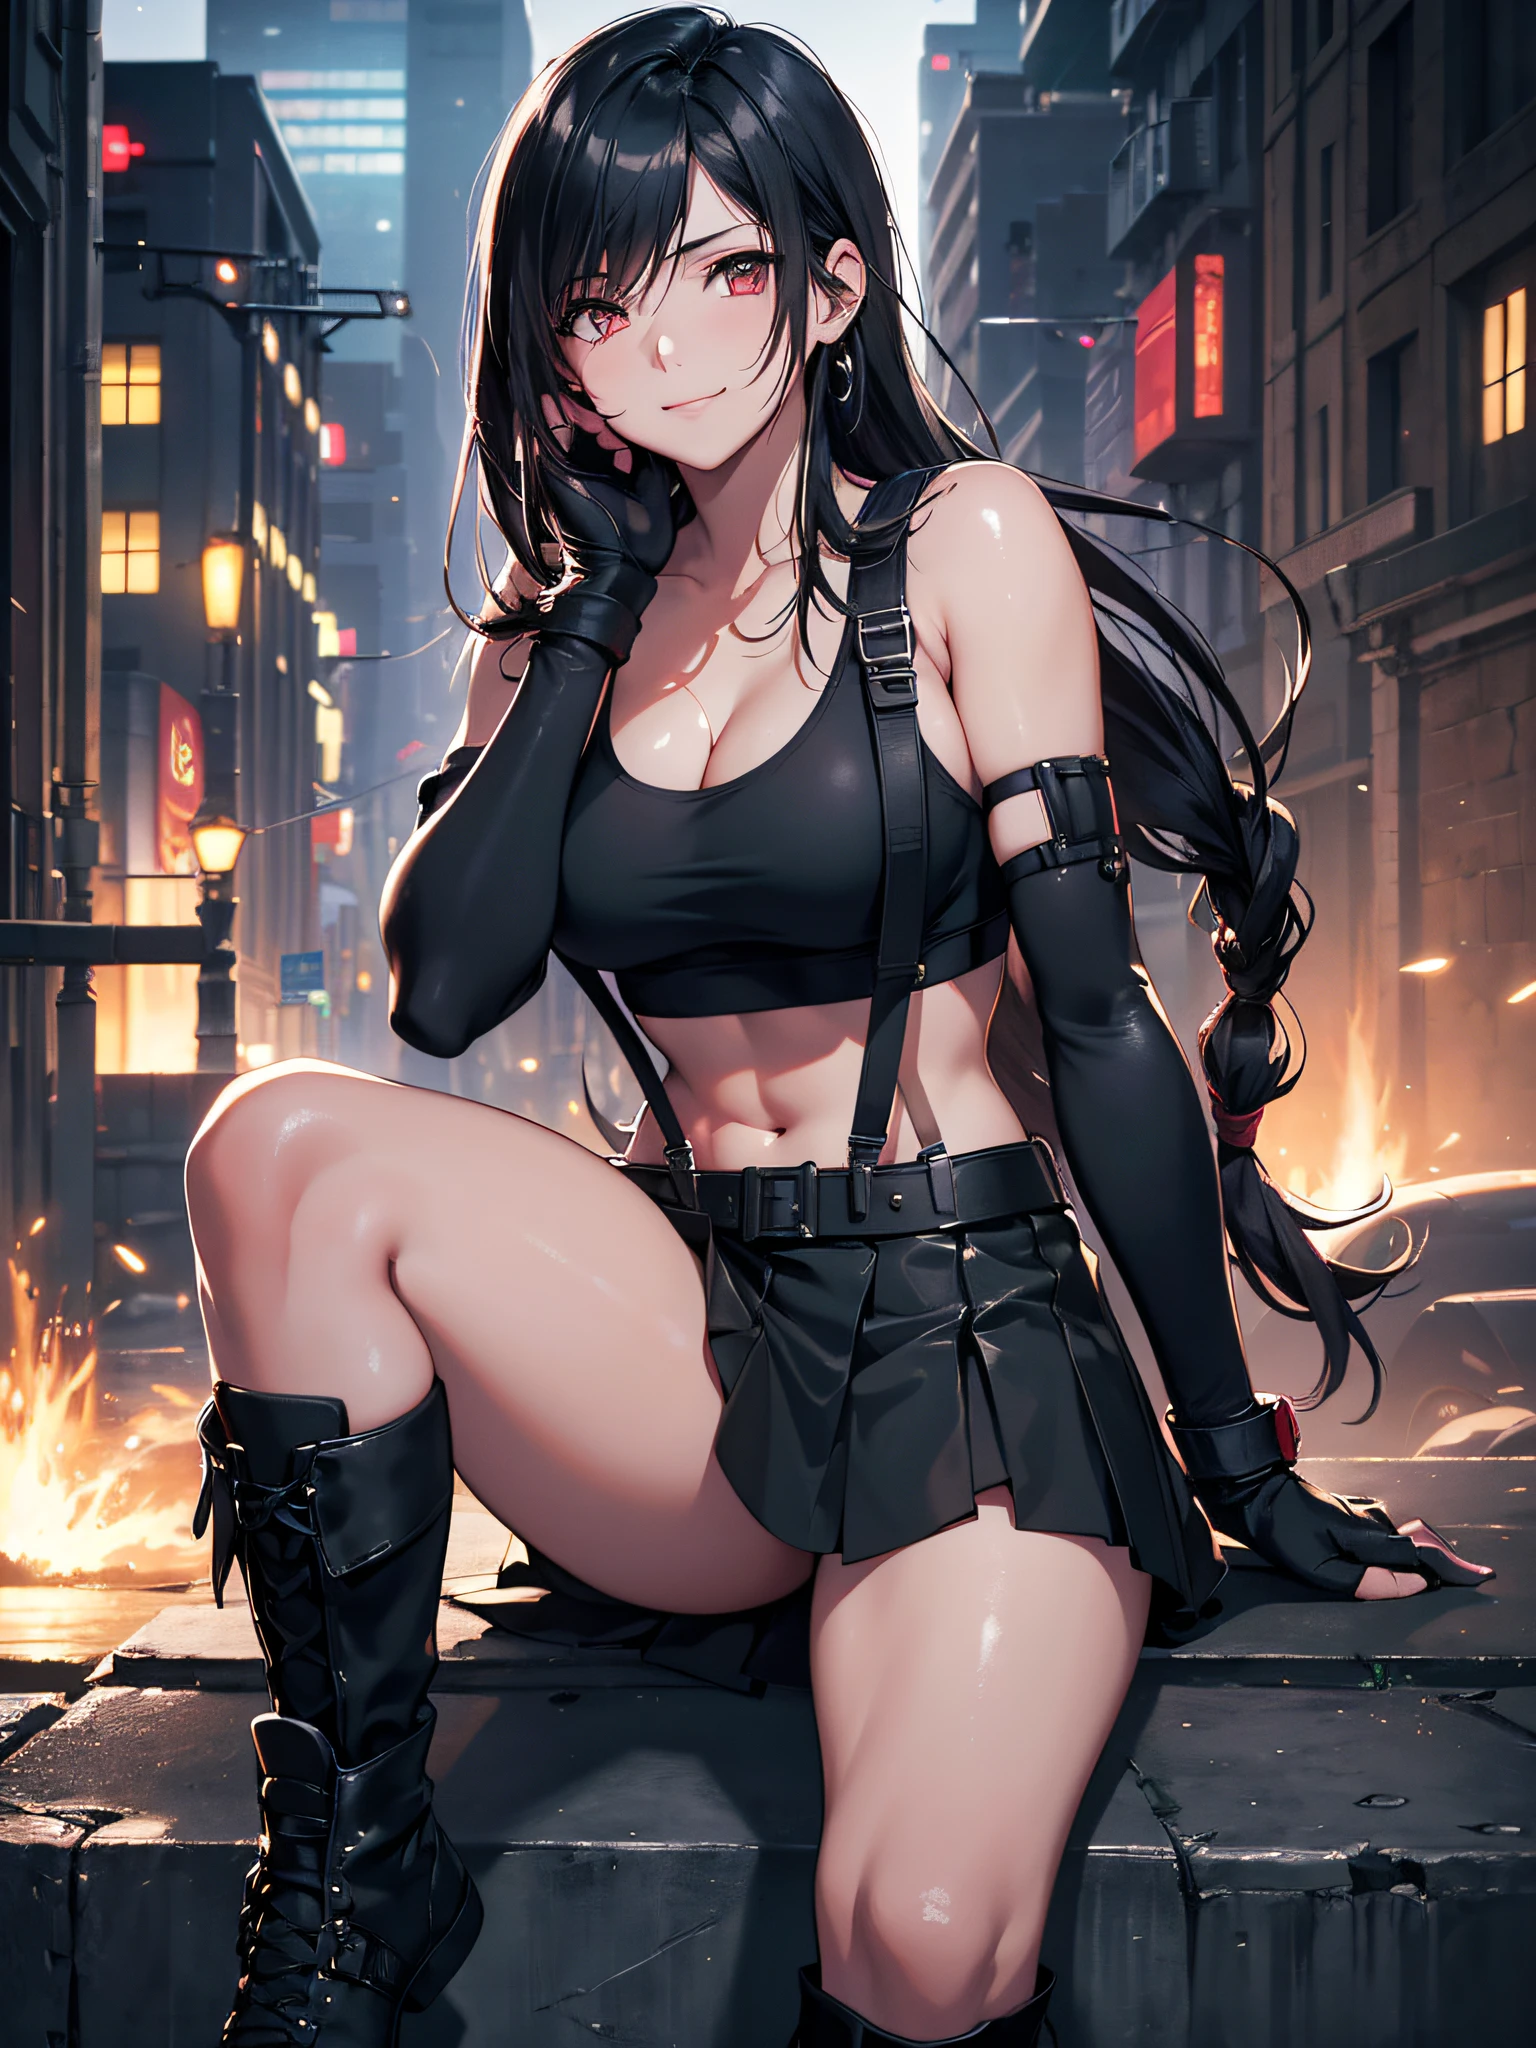 (8K, Best Quality, Masterpiece: 1.2), (Realistic, Photorealistic: 1.37), Super Detail, One Girl, Cute, Solo, (Tifa Lockhart), (Big Breasts), (Beautiful Eyes), (Smile: 1.2), (Closed), Model Pose, Green Light Neon, Cityscape, Depth of Field, Dark and Strong Shadows, Sharp Focus, Motion Blur, depth of field, composition, Final Fantasy VII, dating, (nose brush), single elbow pads, ankle boots, black hair, red boots, elbow gloves, elbow pads, fingerless gloves, sports bra, black skirt (suspenders), white tank top: 1.5, full body, headrest, beautiful face, low tie long hair, (red_eyes), (night: 1.3), complex, cinematic lighting, photon mapping, radiosity, physically based rendering, (Tetsuya Nomura style), perfect breast, cleavage: 1.2,